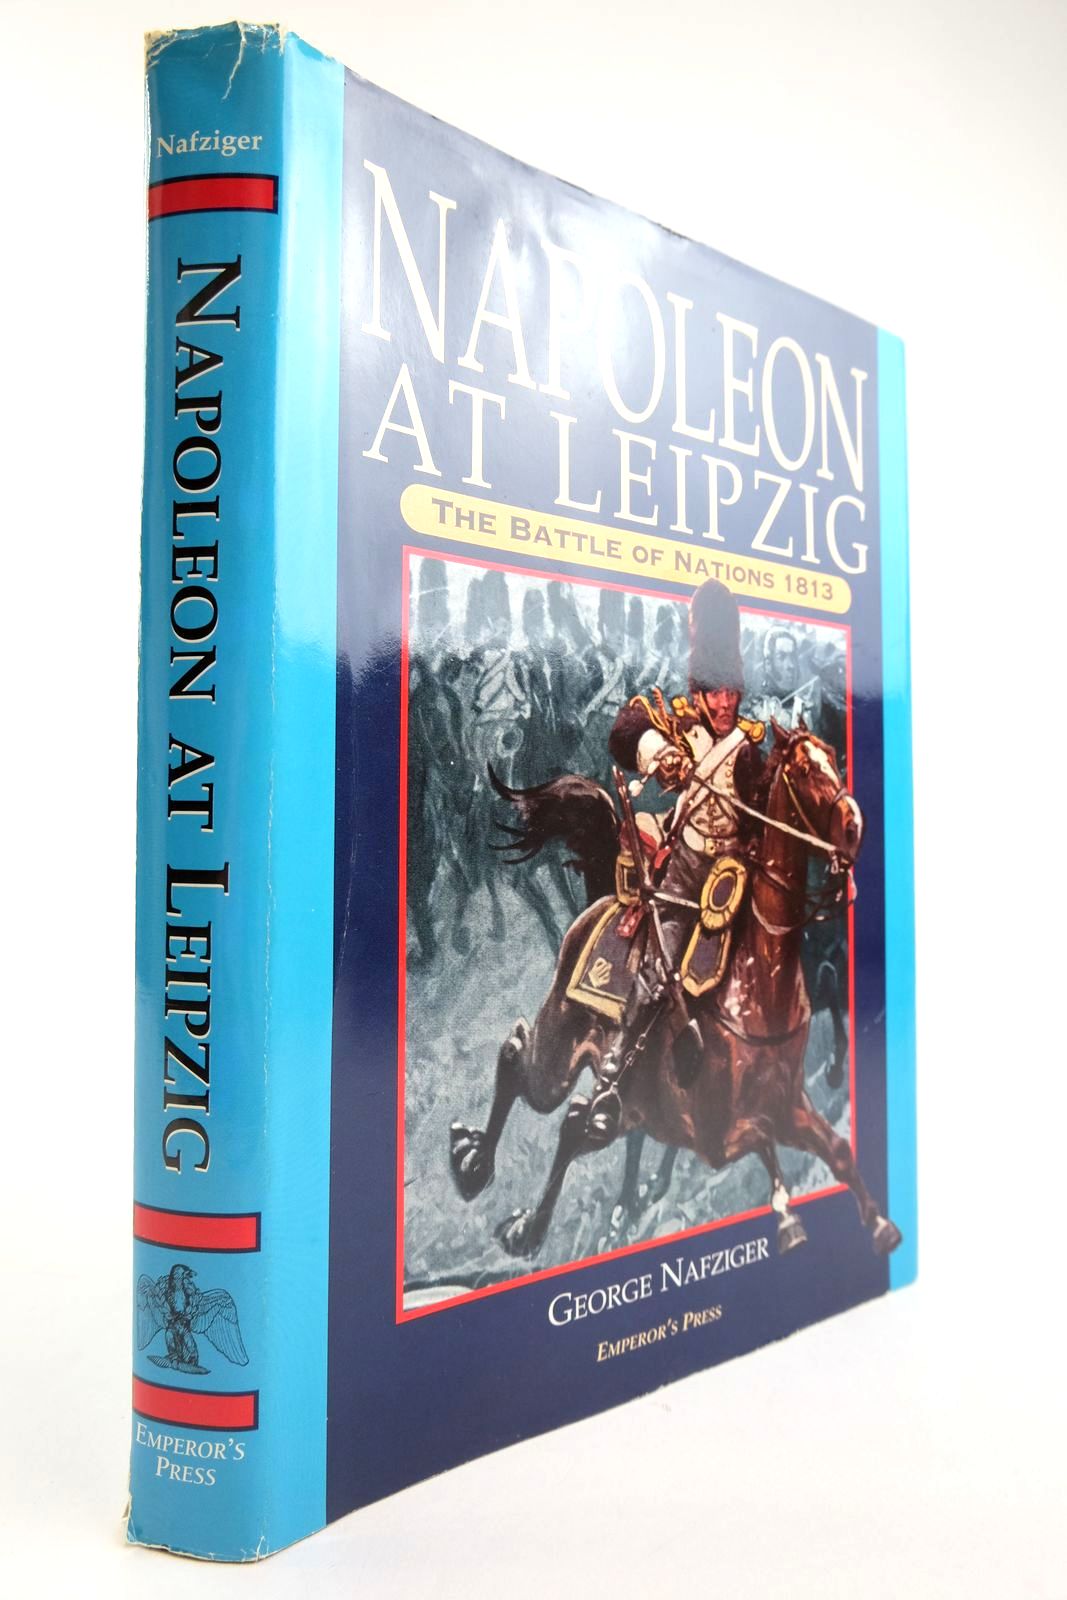 Photo of NAPOLEON AT LEIPZIG: THE BATTLE OF NATIONS 1813 written by Nafziger, George published by Emperor's Press (STOCK CODE: 2134158)  for sale by Stella & Rose's Books